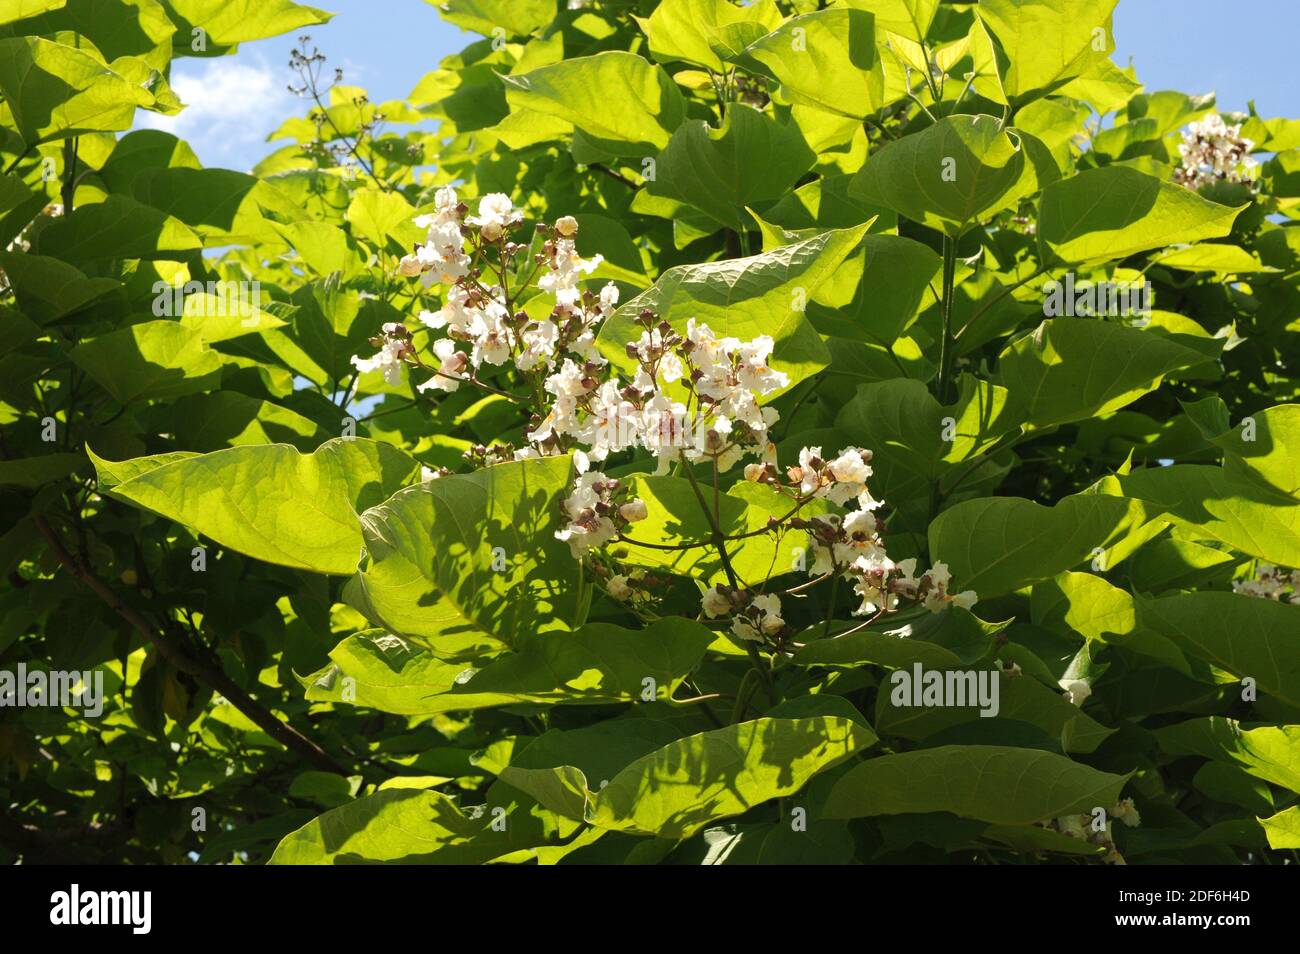 Southern catalpa or cigar tree (Catalpa bignoniodes) is a deciduous tree native to southeastern United States of America. Stock Photo